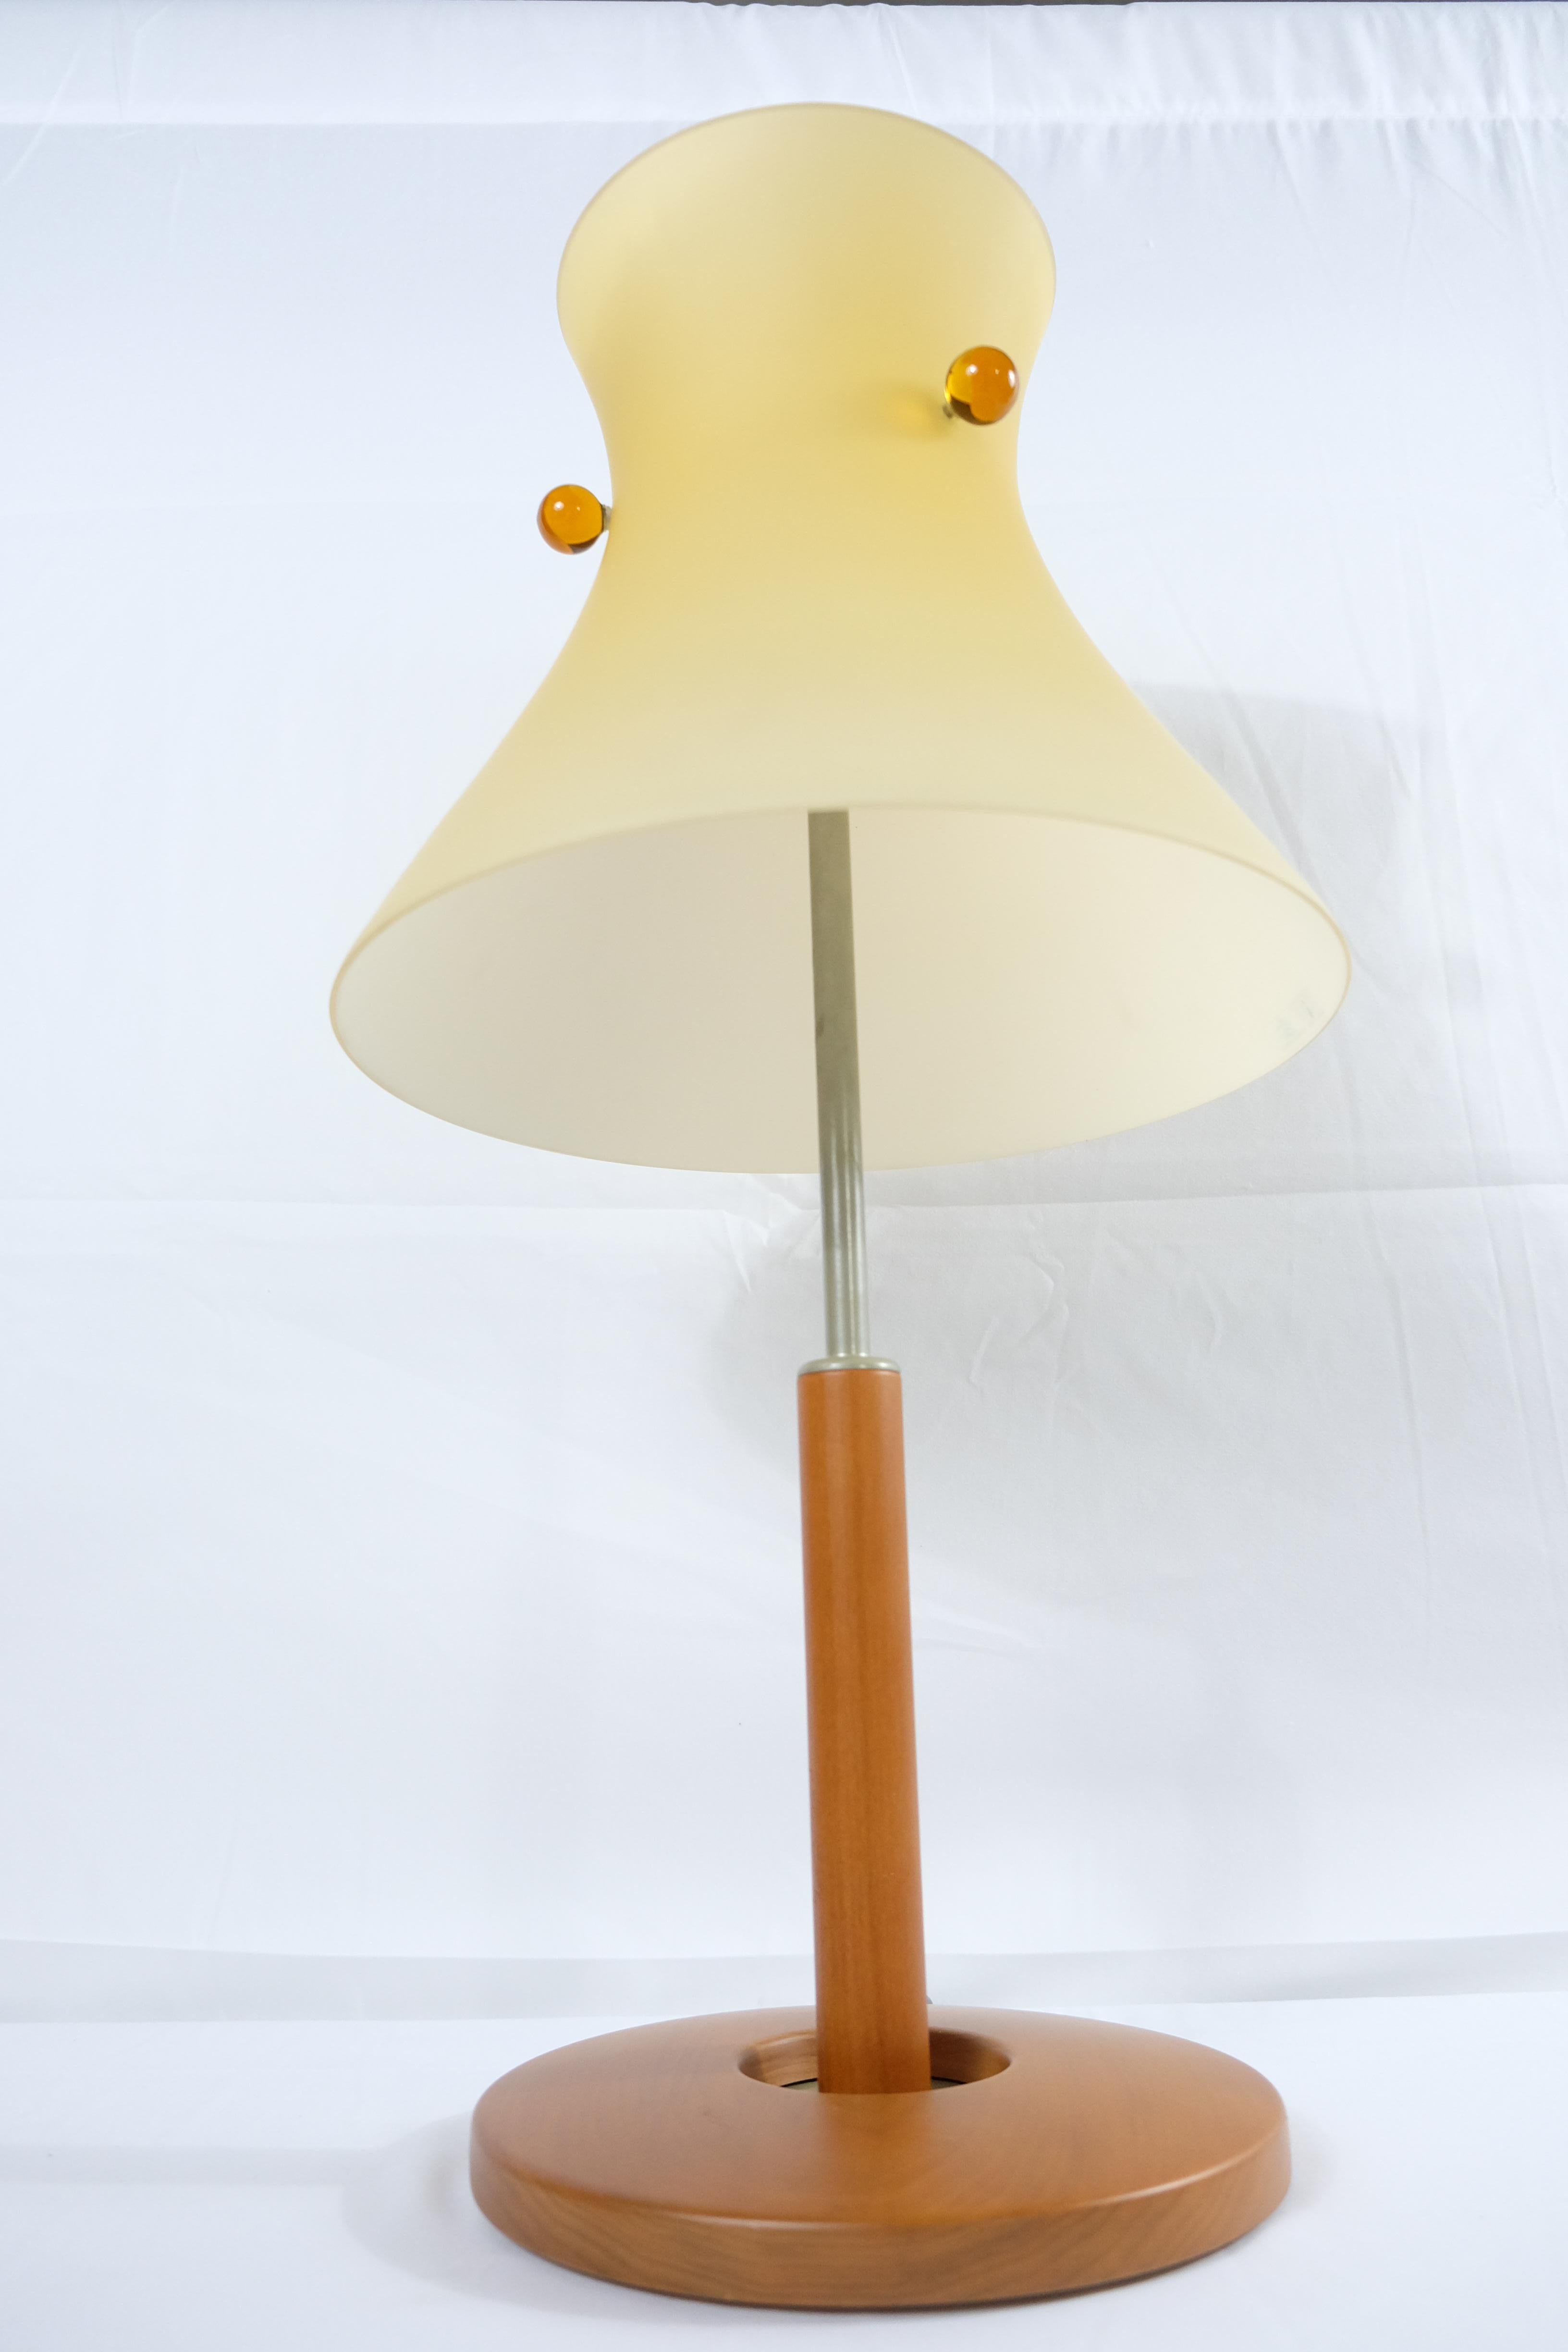 Midcentury ITRE Italian Murano glass table lamp with wood base.